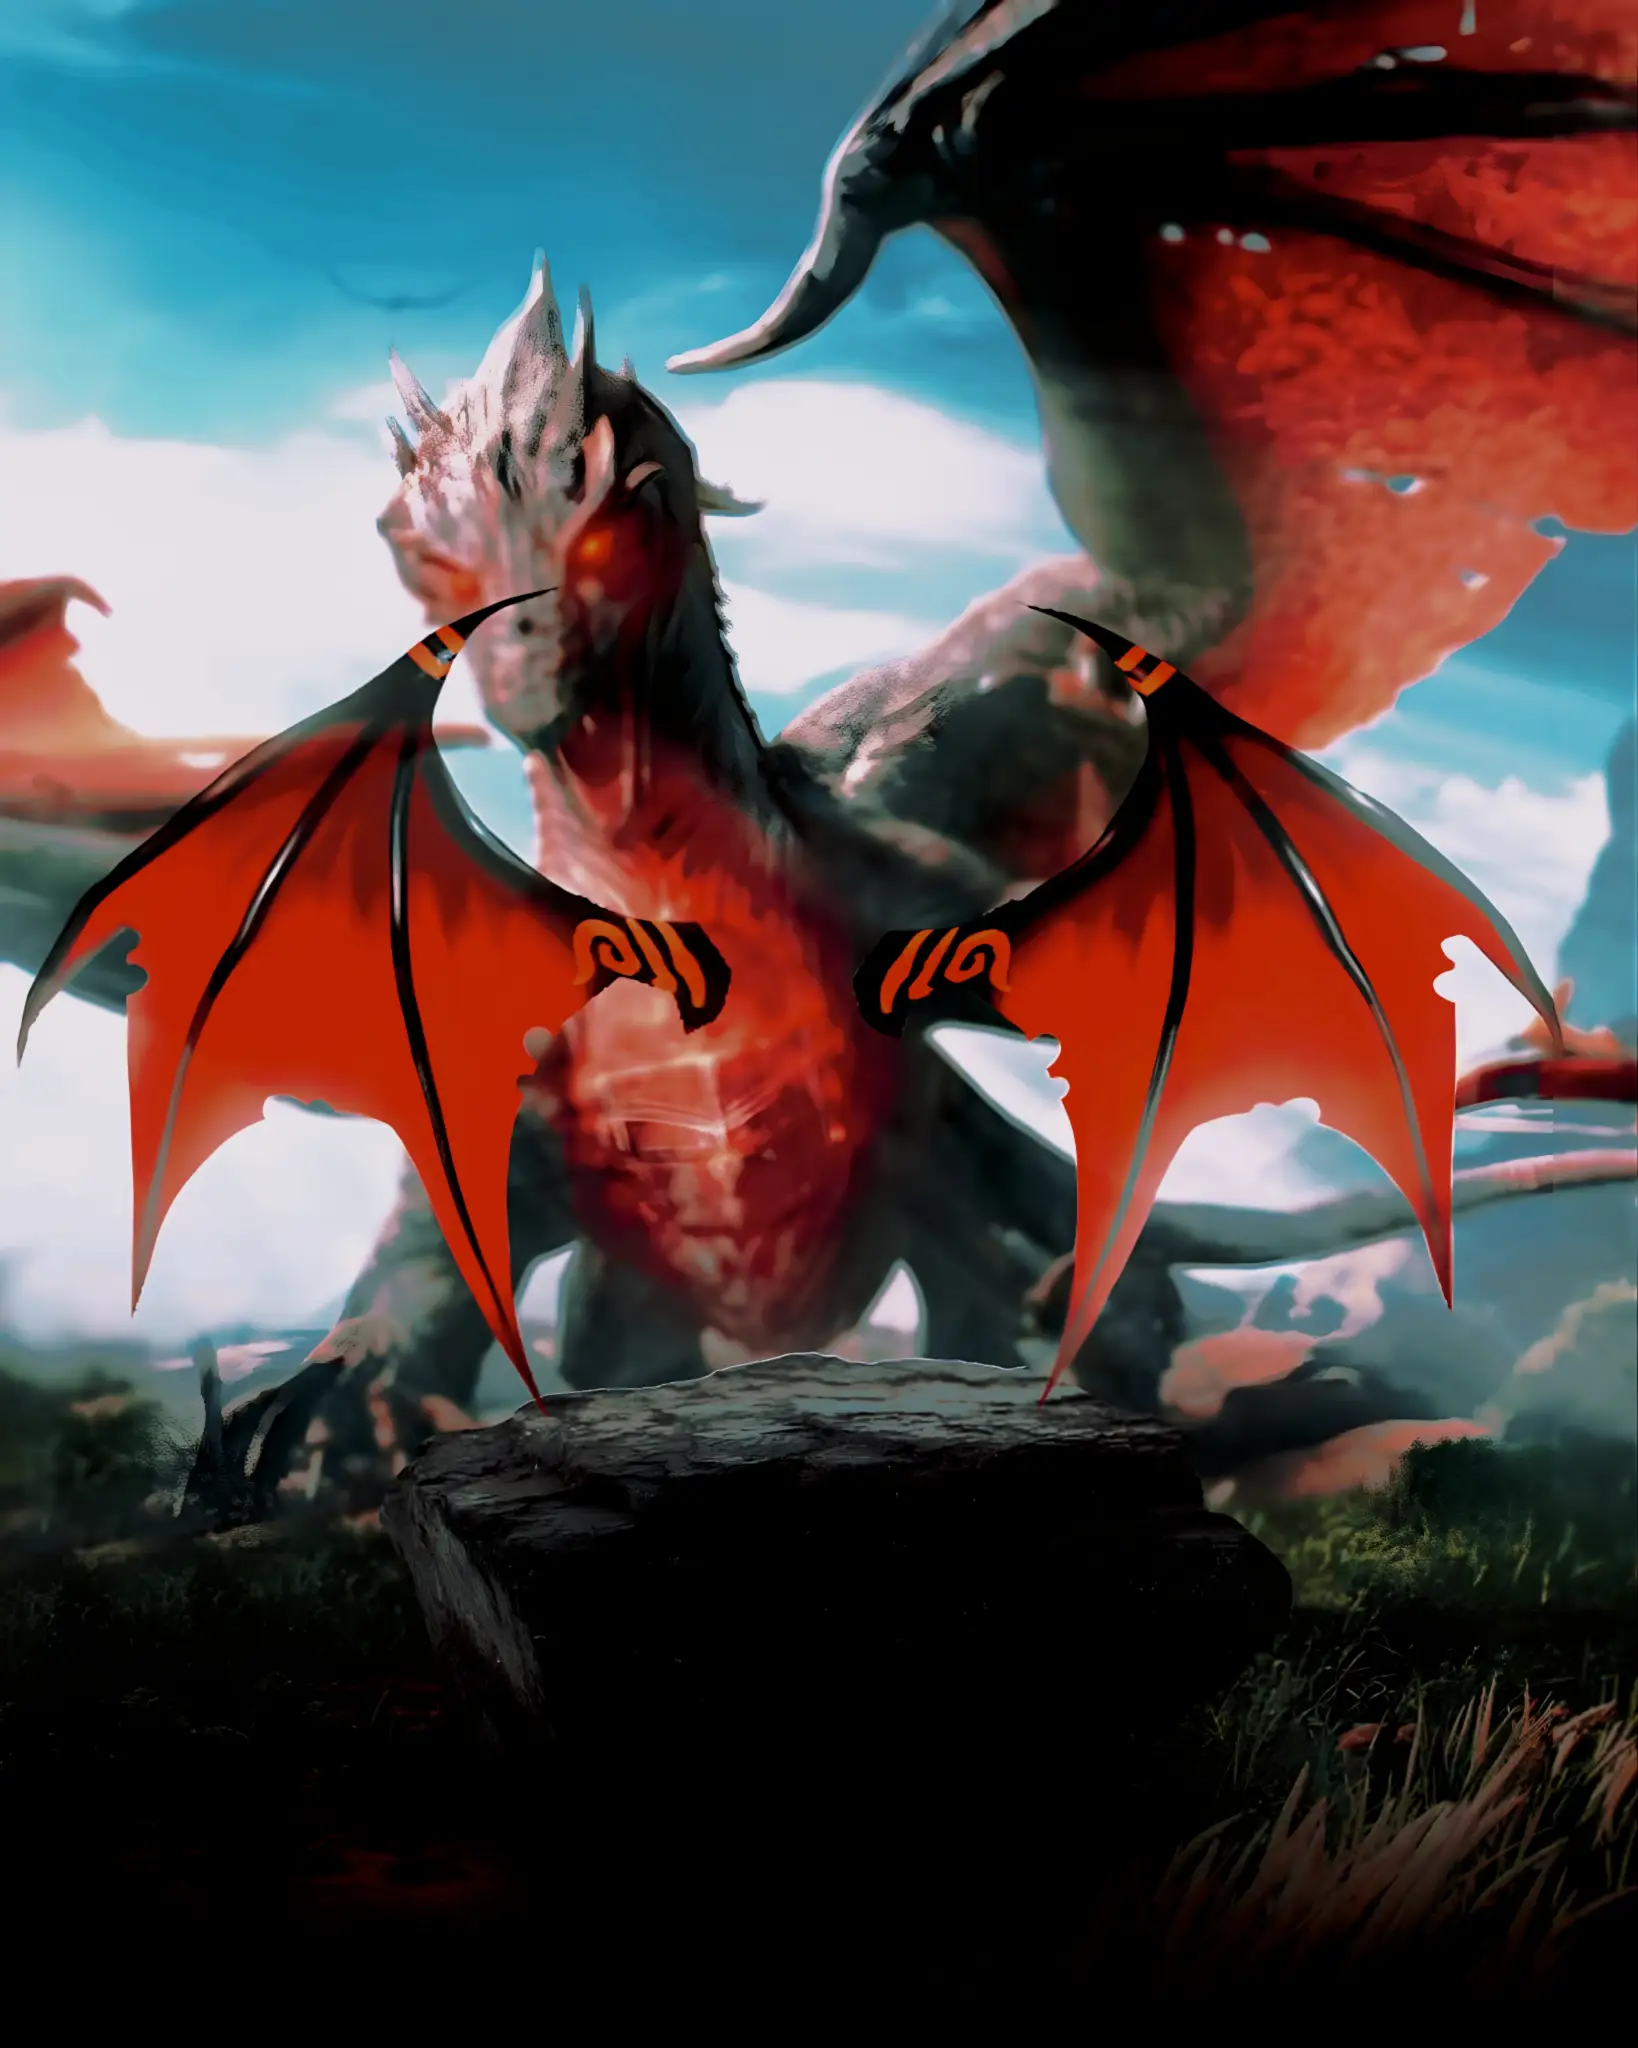 You are currently viewing Dragon picsart background download hd